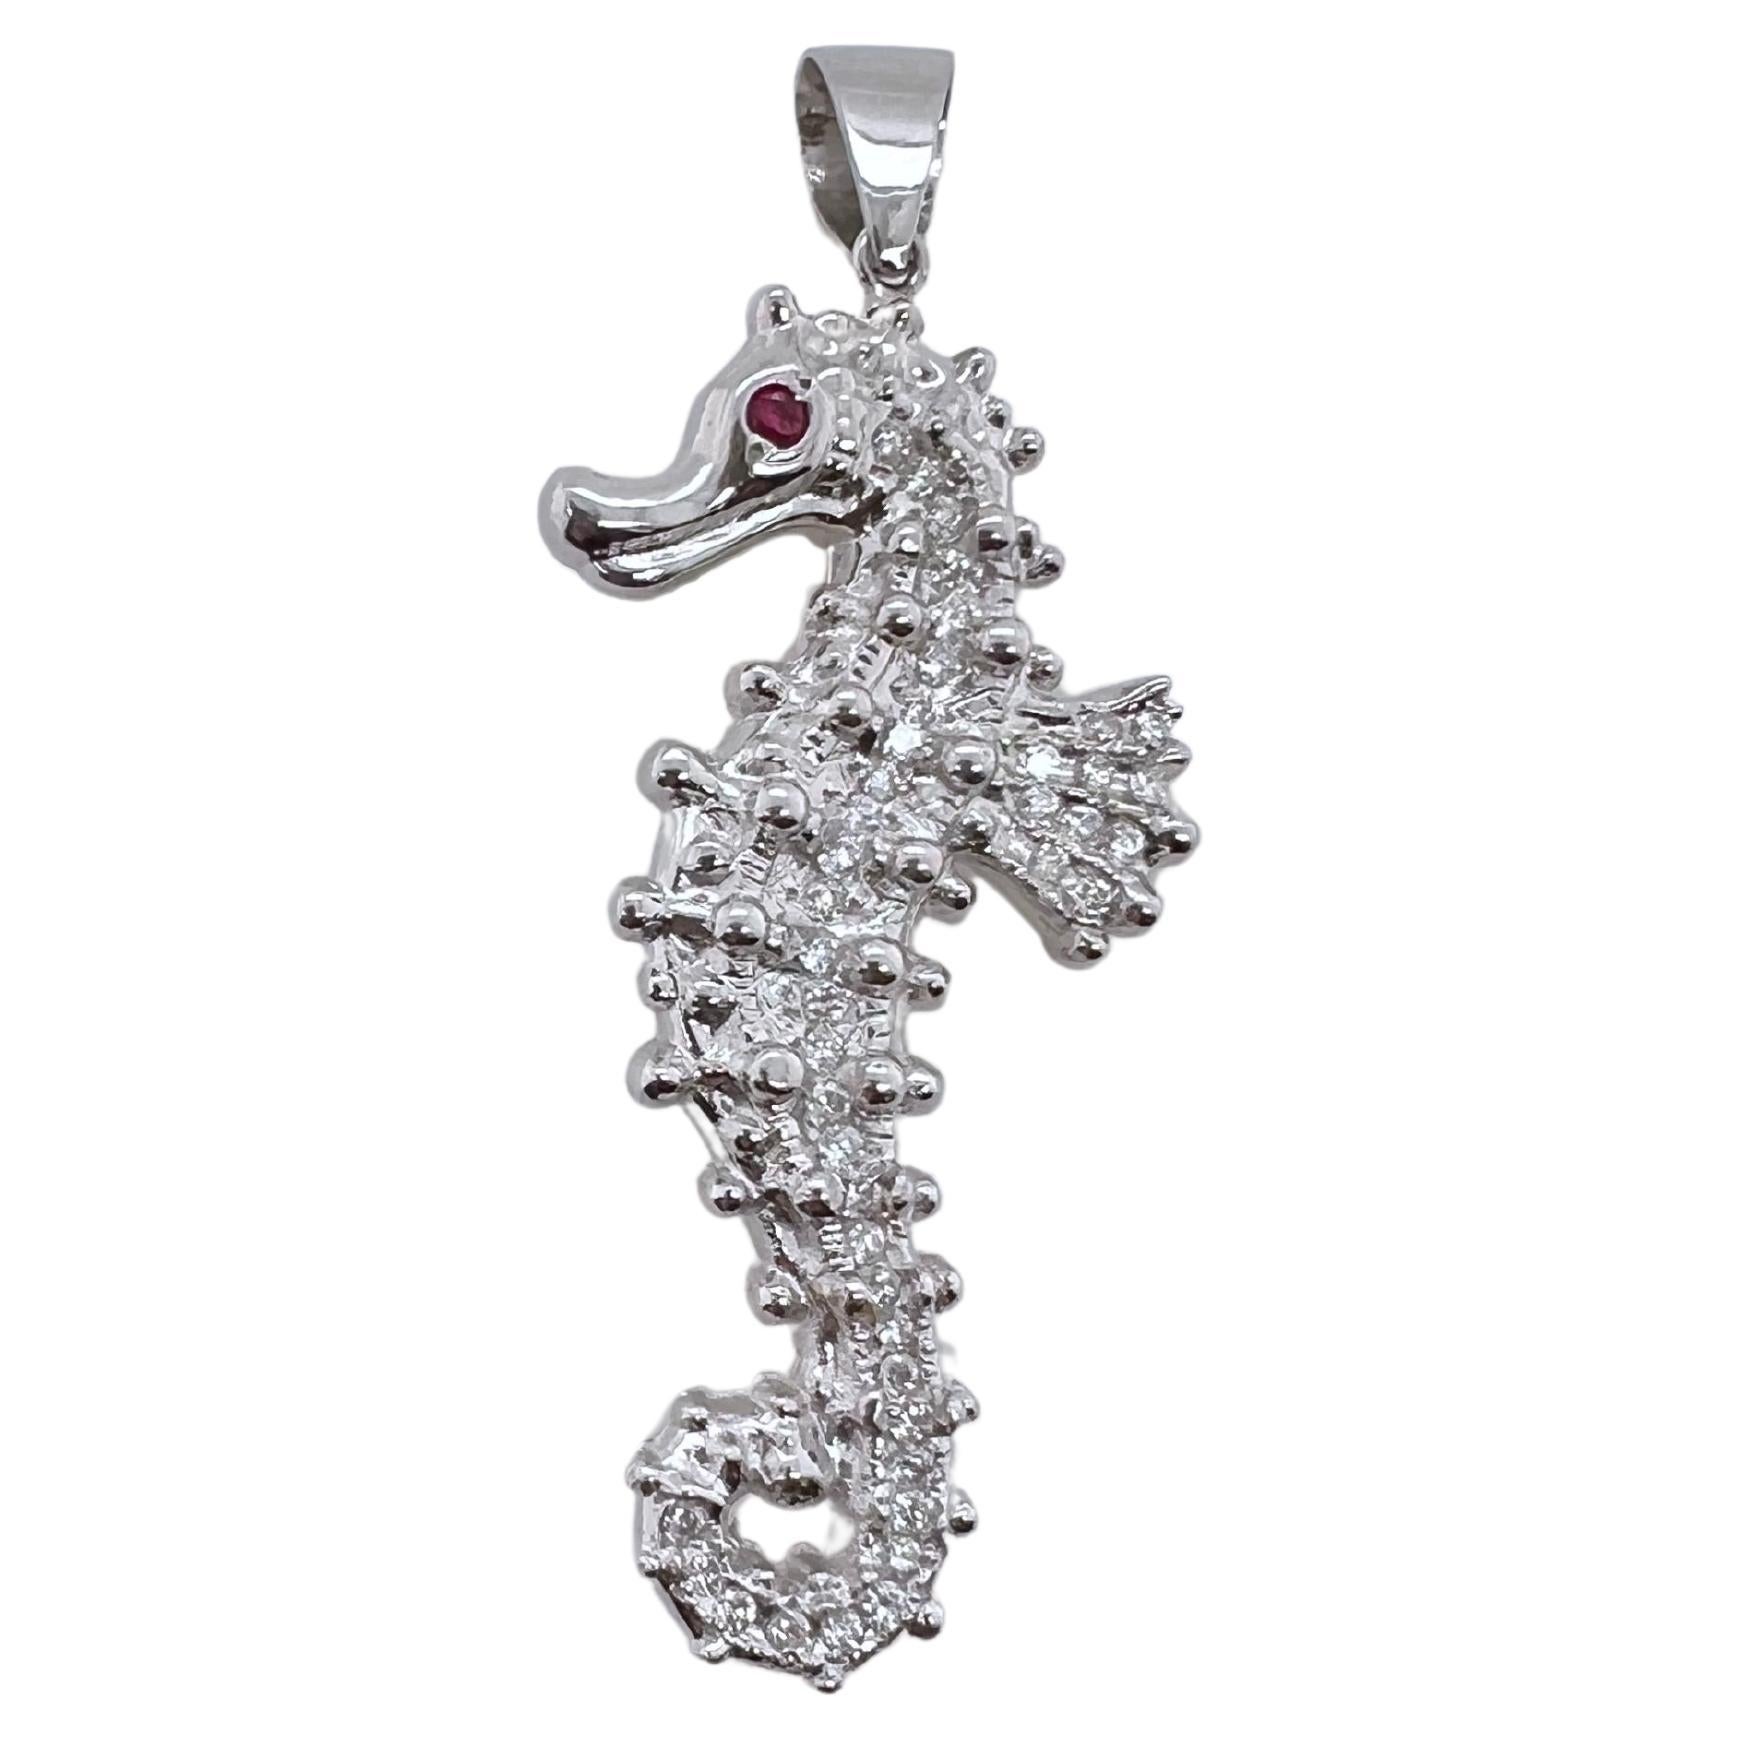 14k White Gold Diamond Small Seahorse Pendant / Brooch with Ruby For Sale